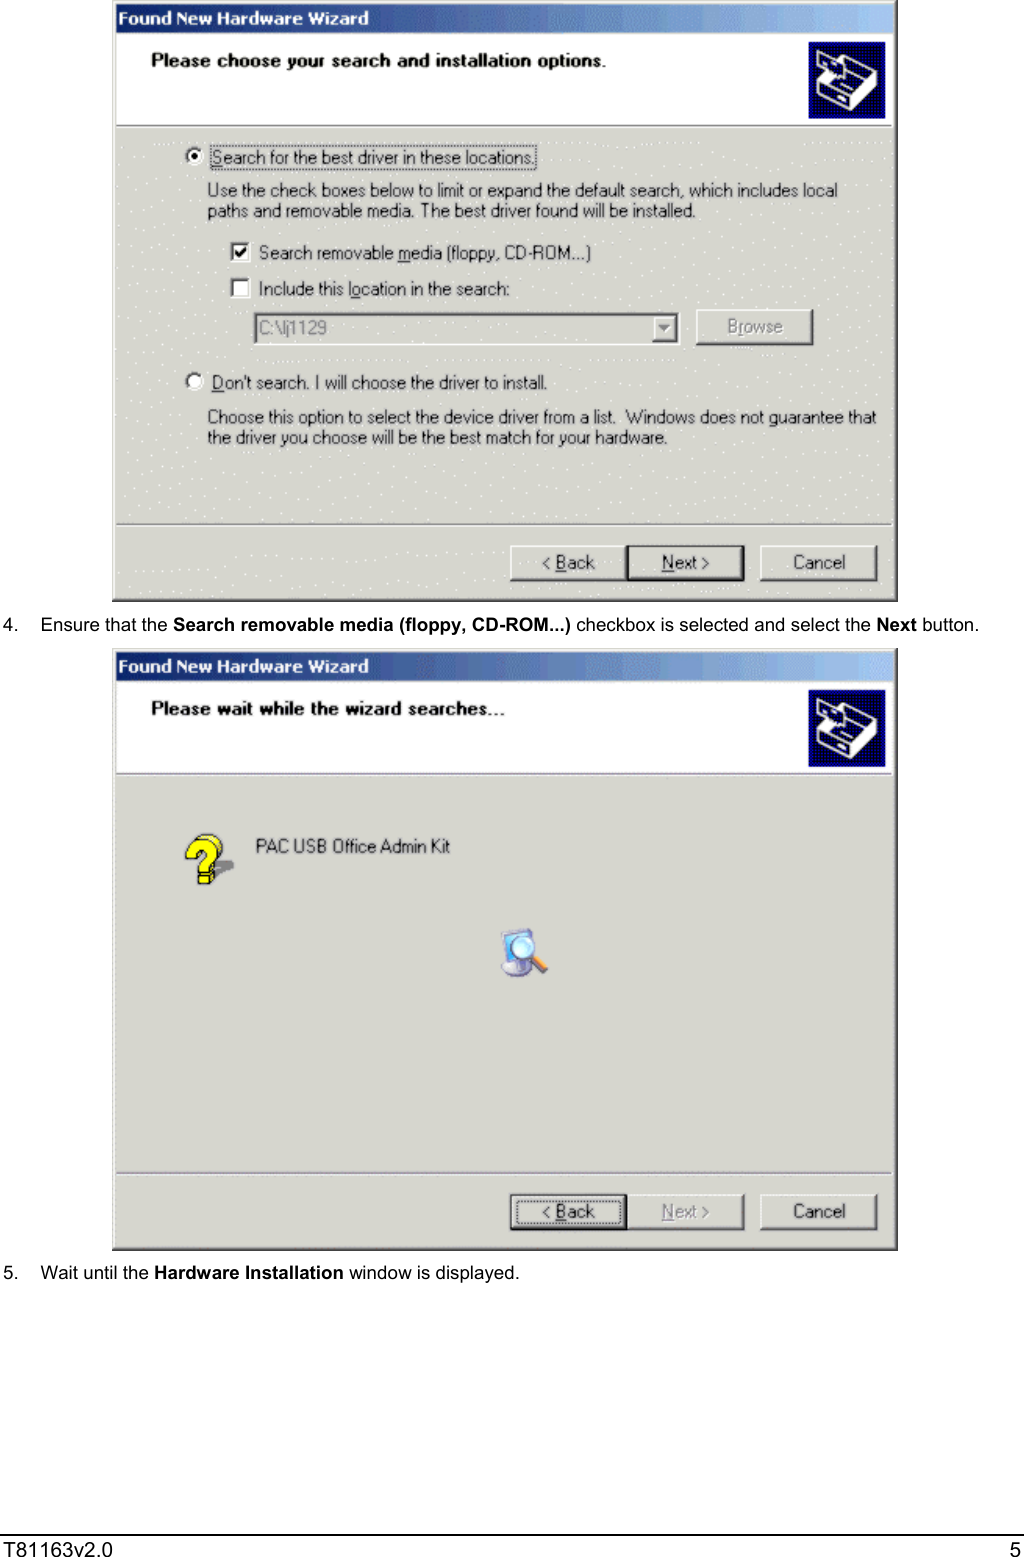  T81163v2.0   5  4.  Ensure that the Search removable media (floppy, CD-ROM...) checkbox is selected and select the Next button.  5.  Wait until the Hardware Installation window is displayed. 